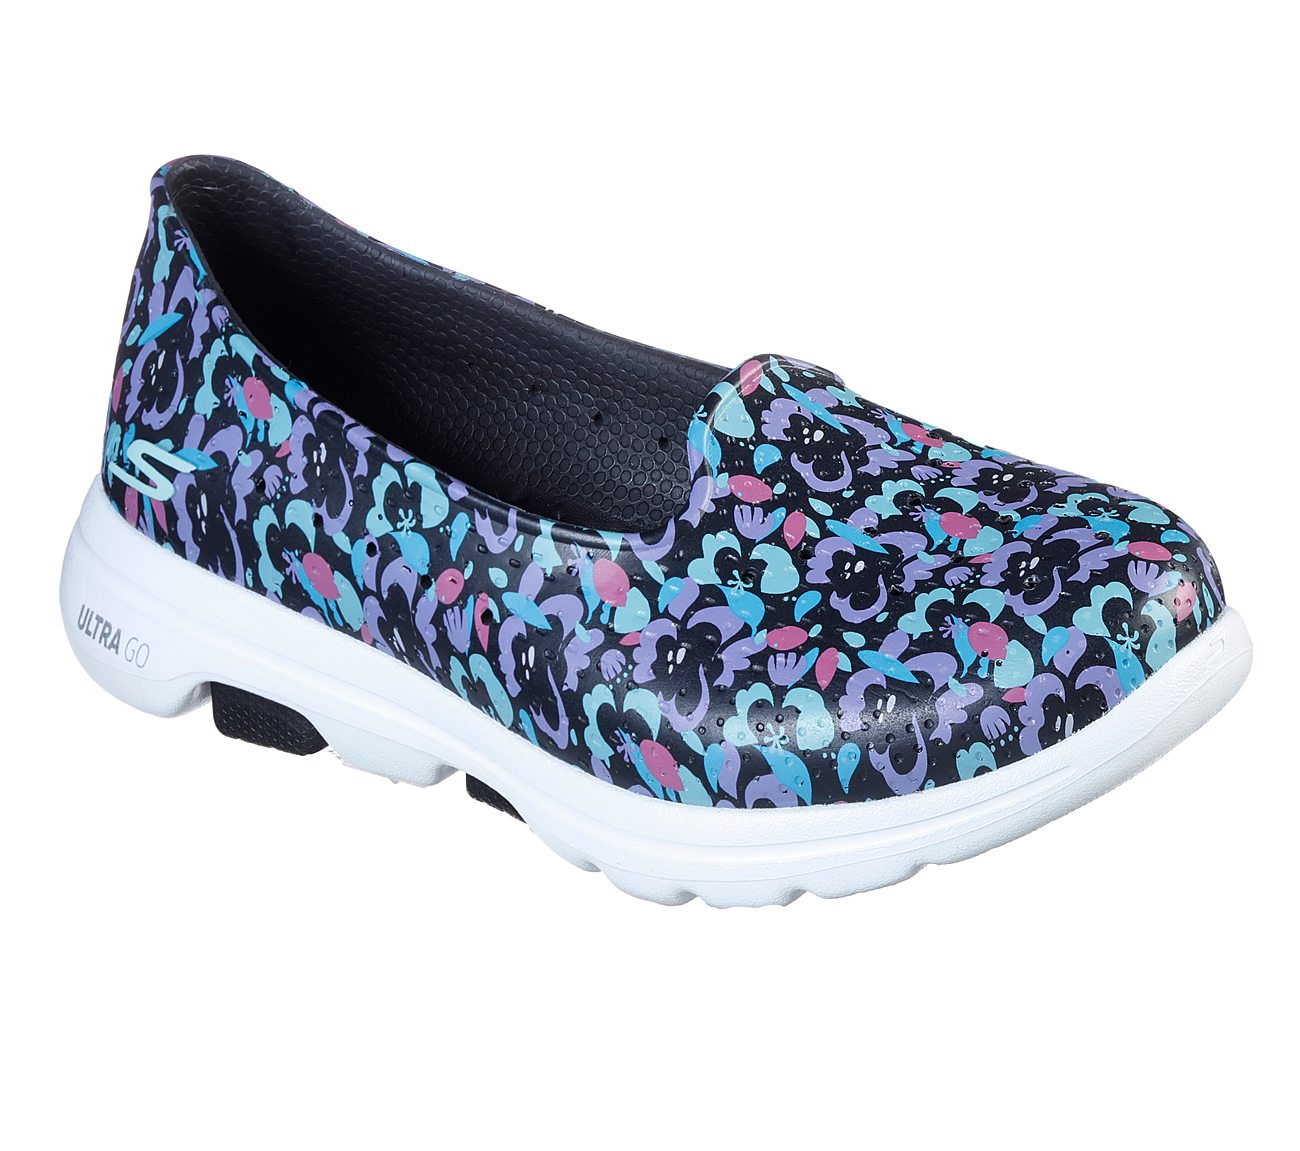 GO WALK 5 - BLOSSOMS, BLACK/MULTI Footwear Lateral View